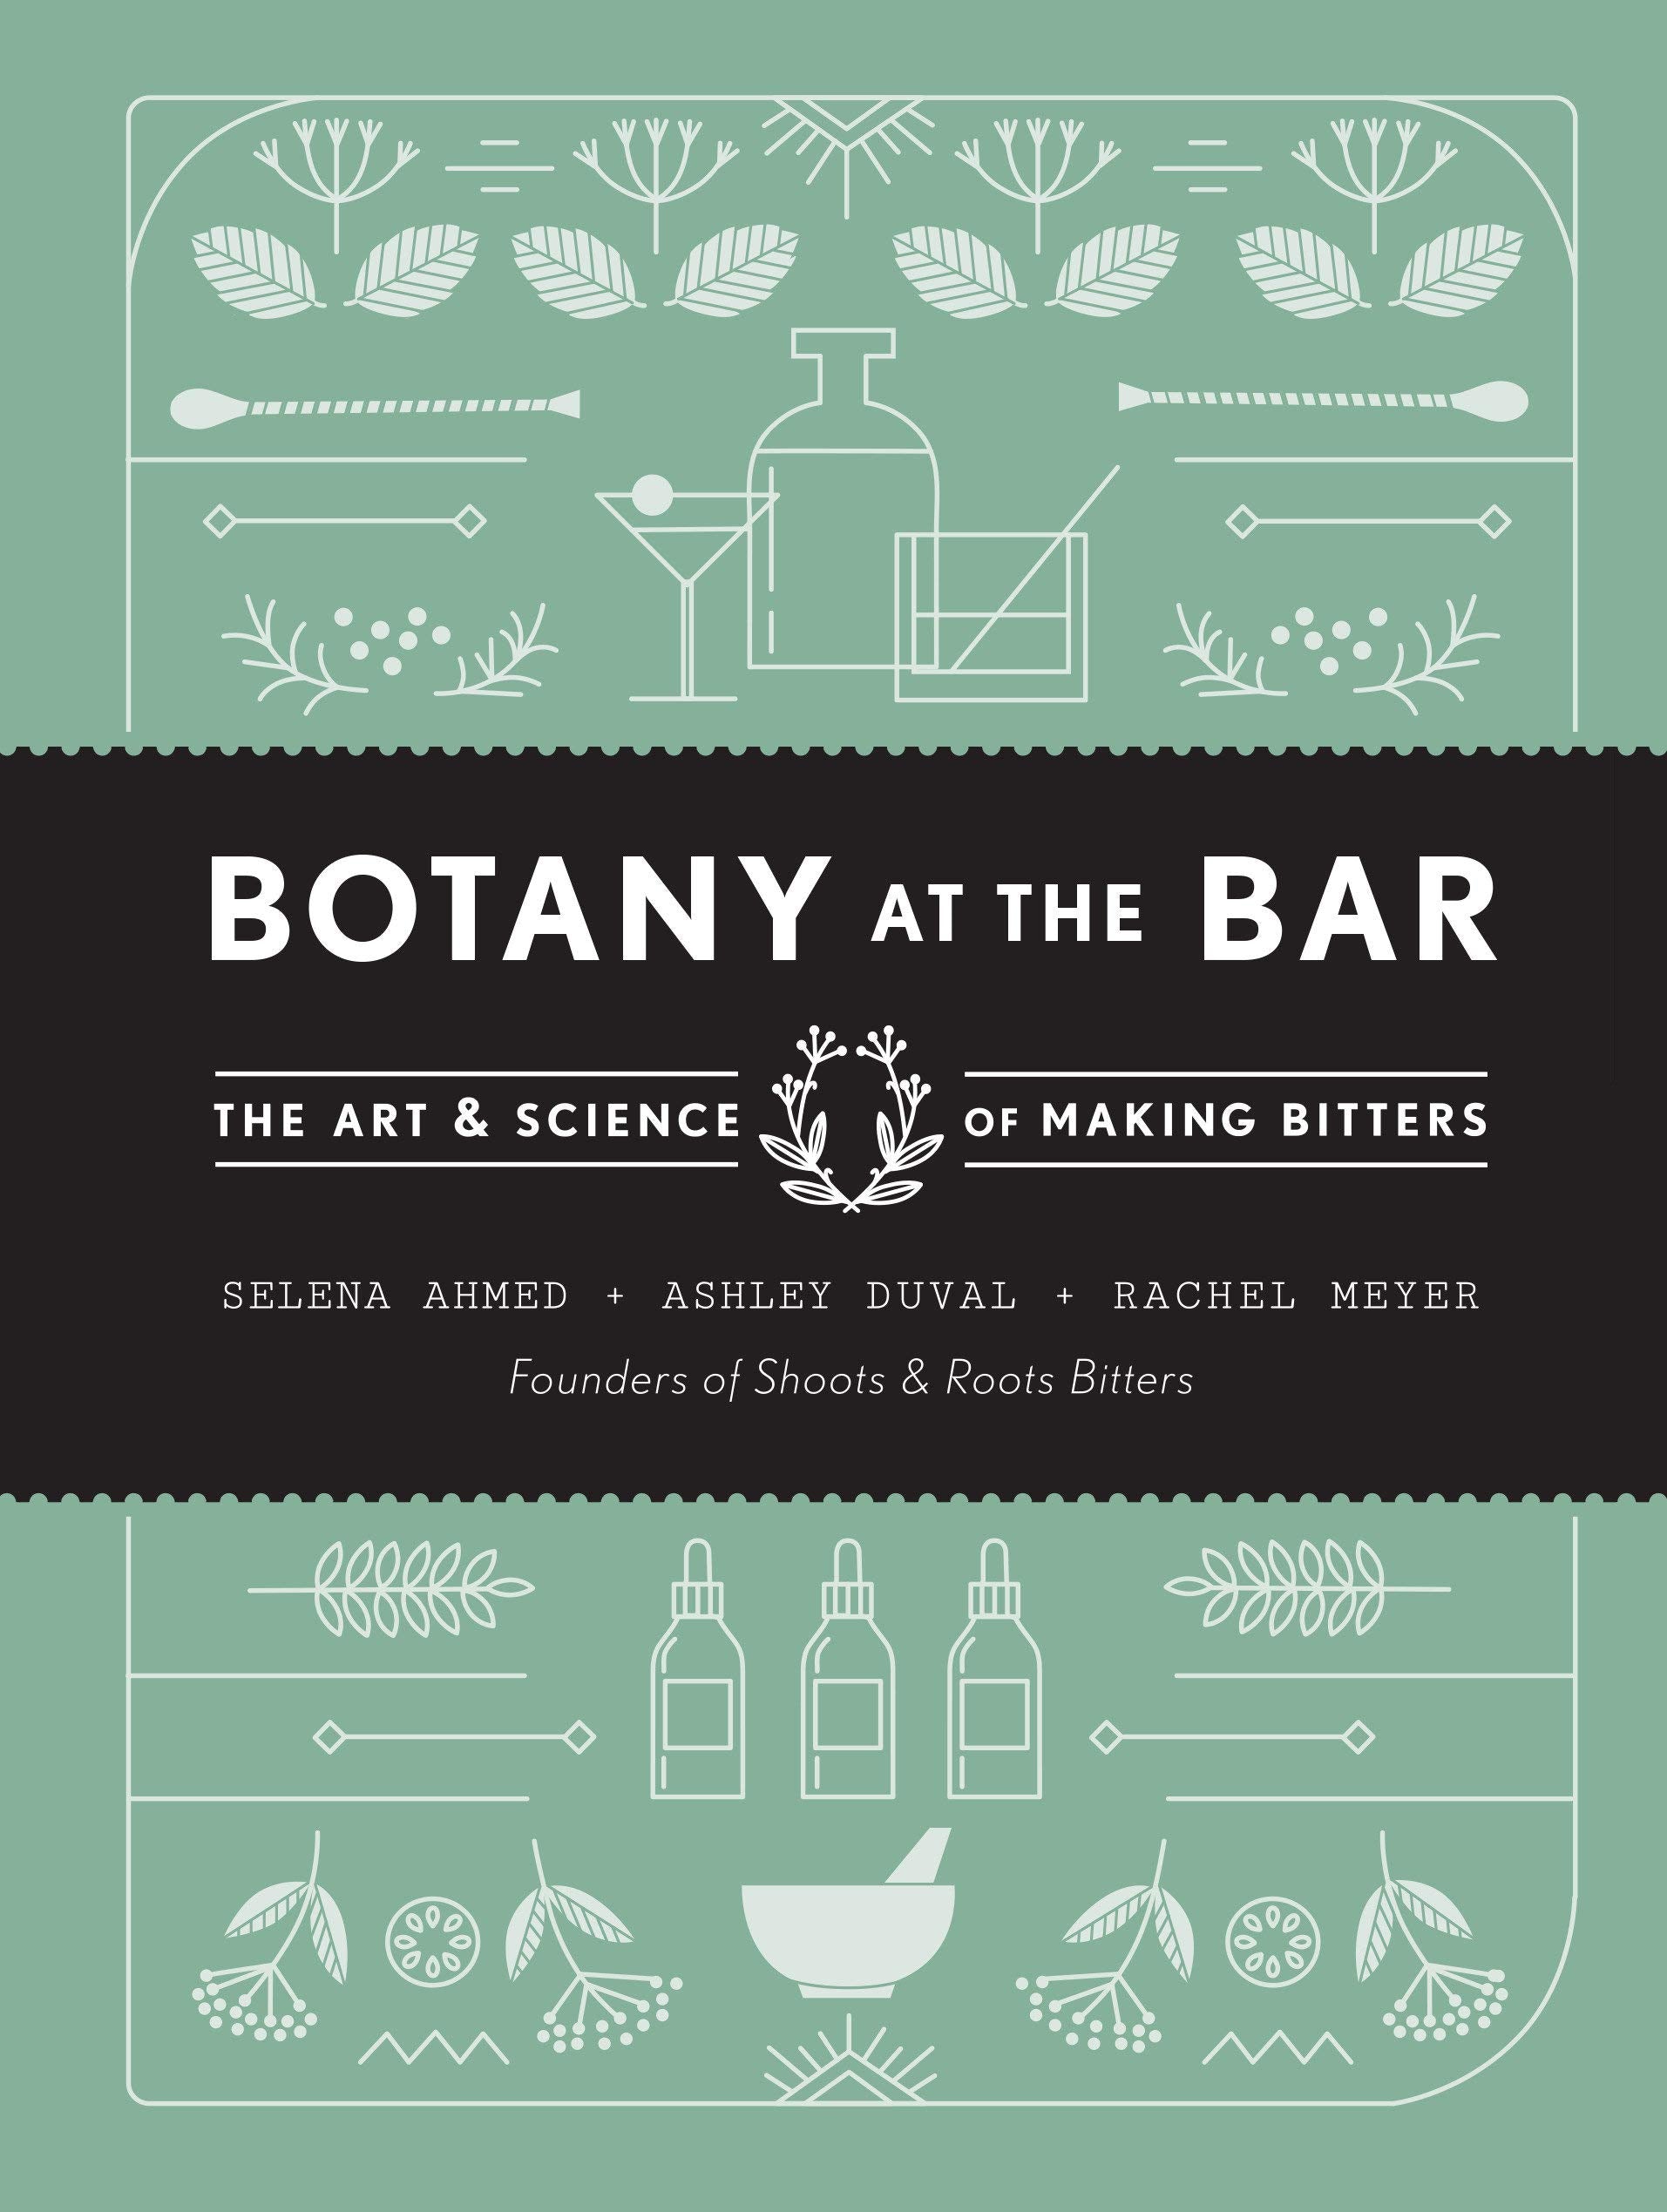 Botany at the Bar: The Art and Science of Making Bitters (Selena Ahmed, Ashley Duval, Rachel Meyer)